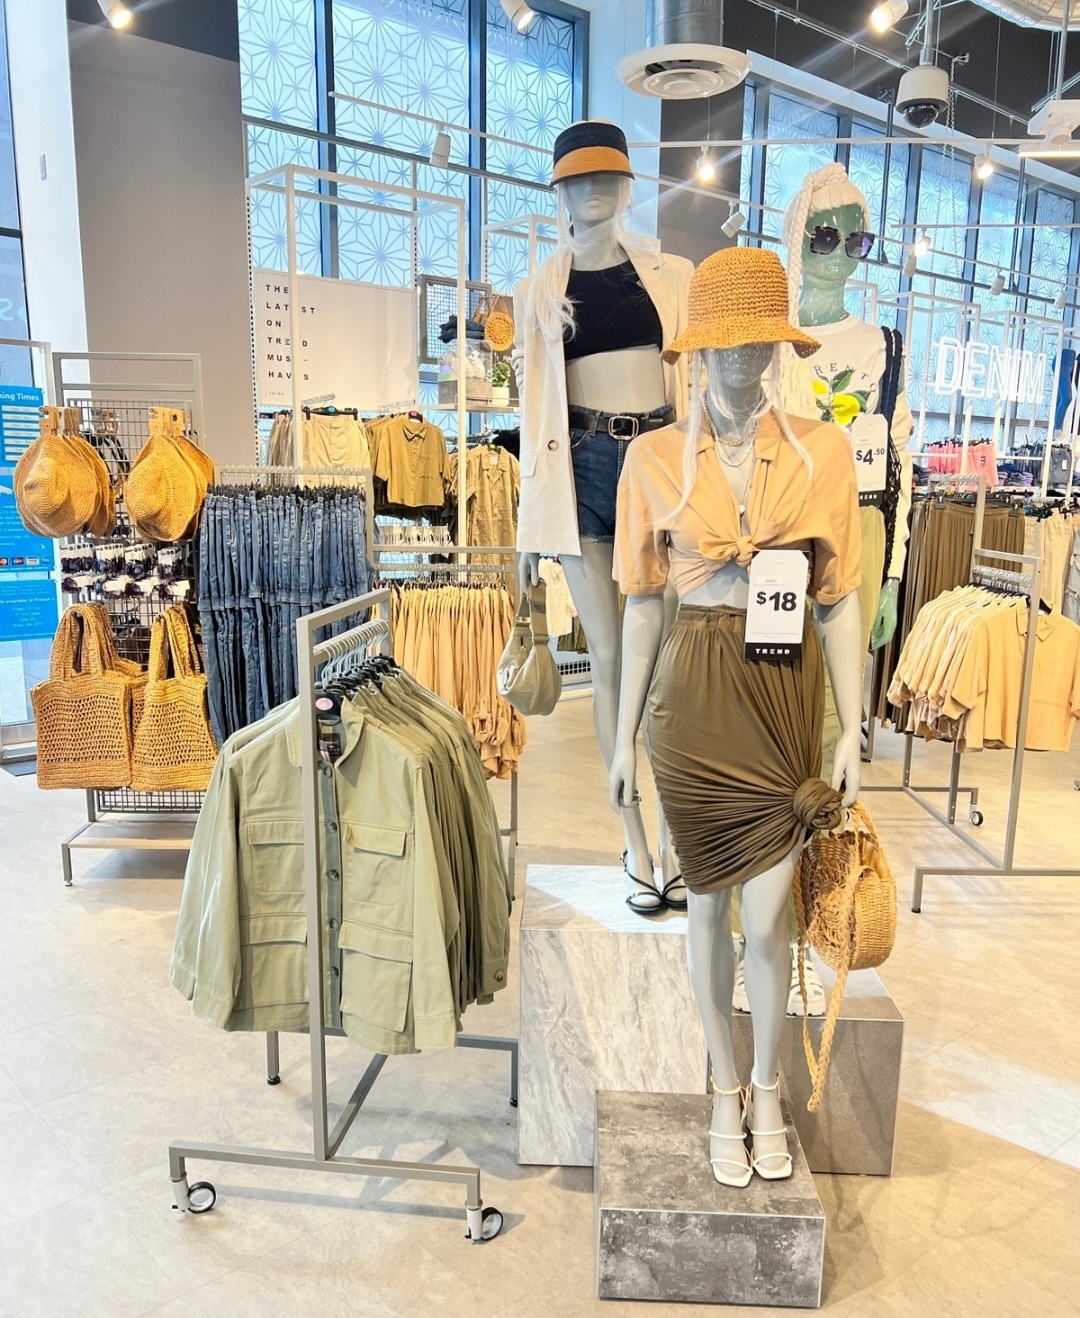 3 mannequins dressed in summer attire. nuetral and green summer attire in store sidplaying bags hats and jackets